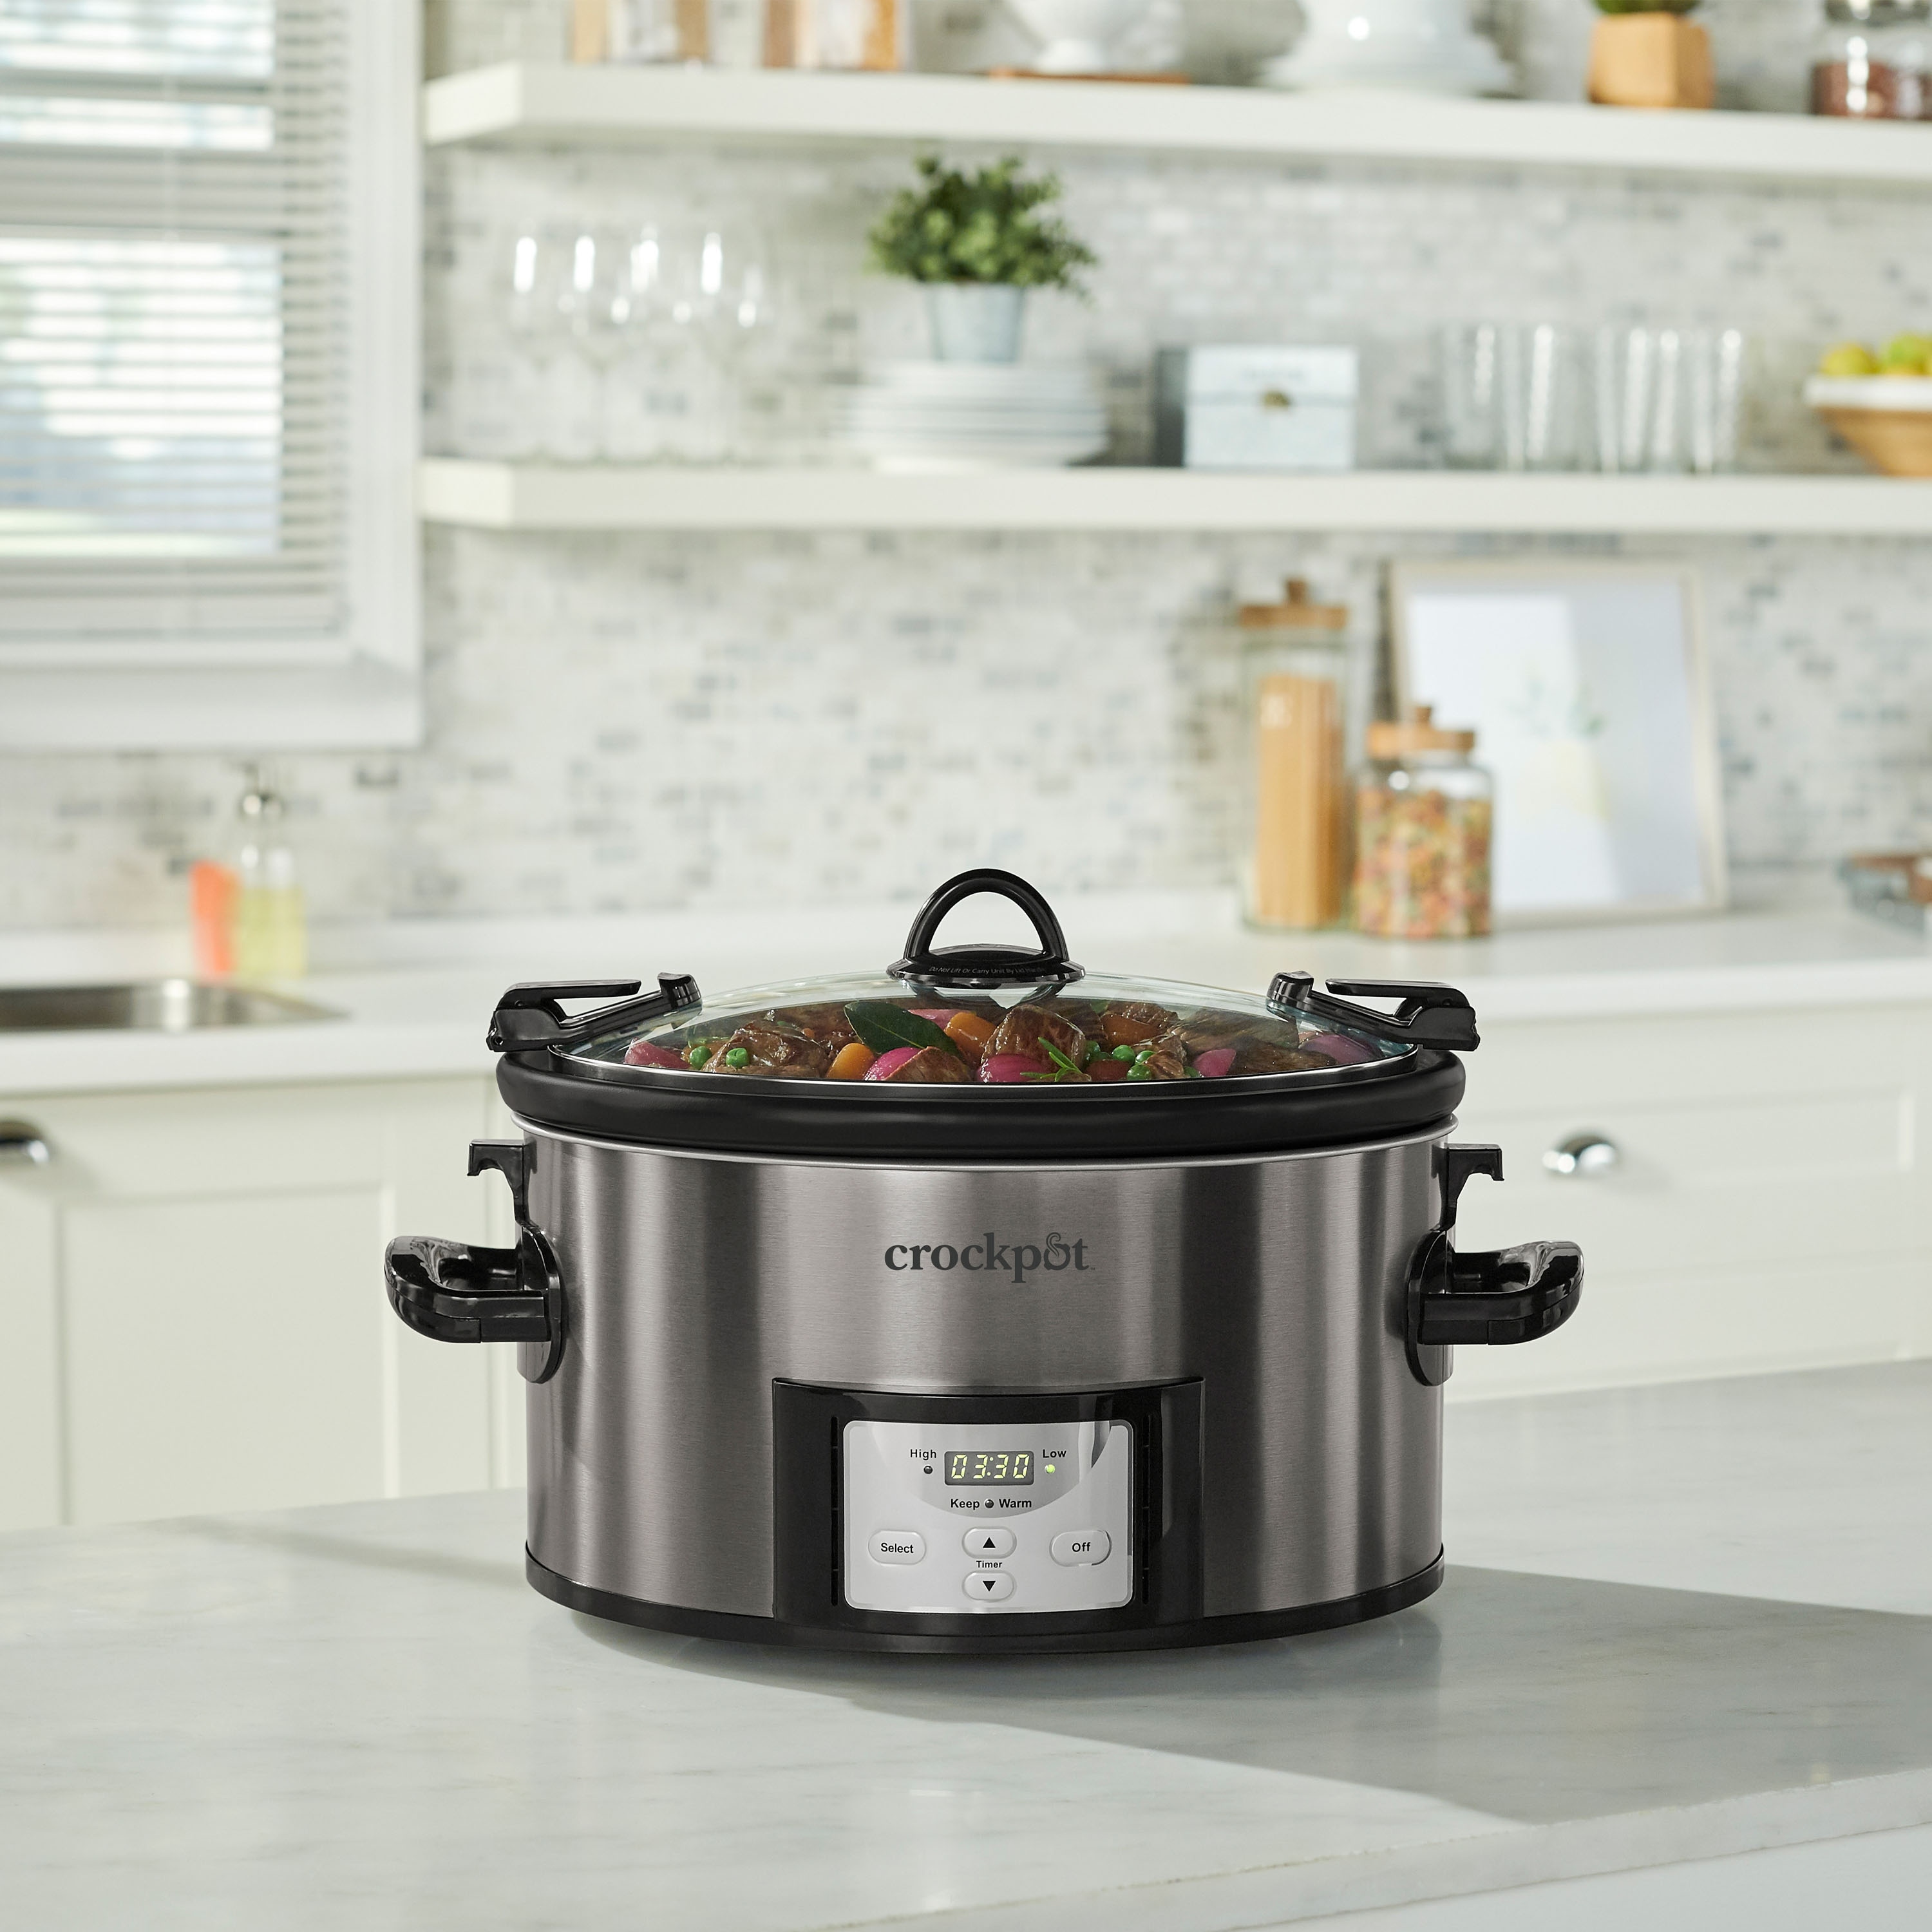 https://ak1.ostkcdn.com/images/products/is/images/direct/5cefadc3988cb5735e3e0c8d802cf0f339288f1c/Crockpot-7-Quart-Easy-to-Clean-Cook-%26-Carry-Slow-Cooker%2C-Black-Stainless-Steel.jpg